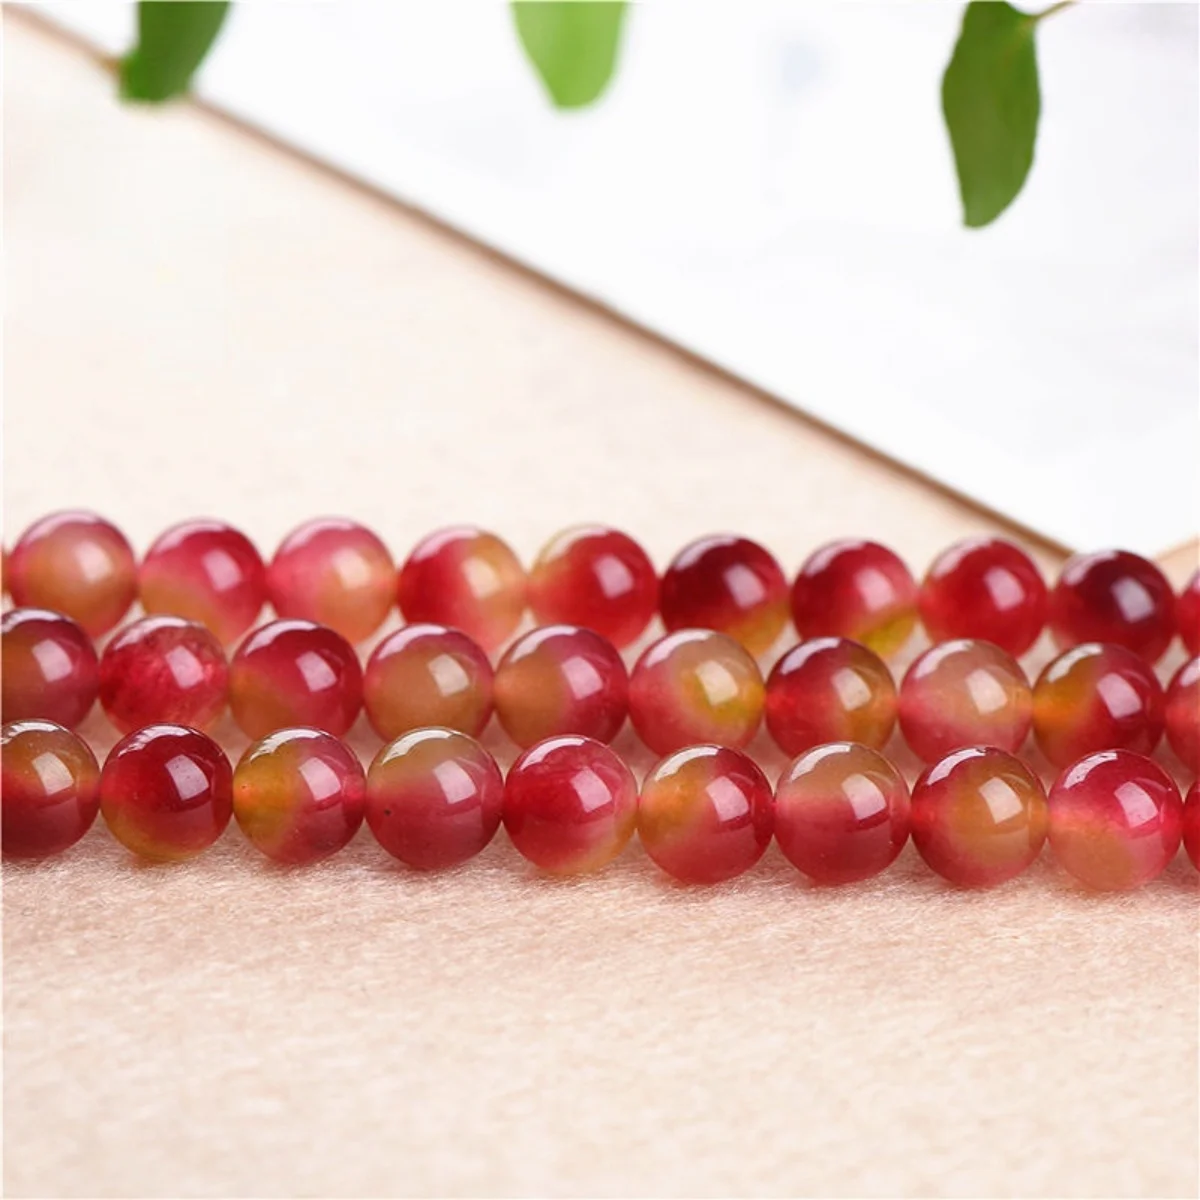 

6 8 10 12 14mm Red Crystal Watermelon Chalcedony Loose Beads Round Semi-finished Products DIY Fashion Jewelry Making Design